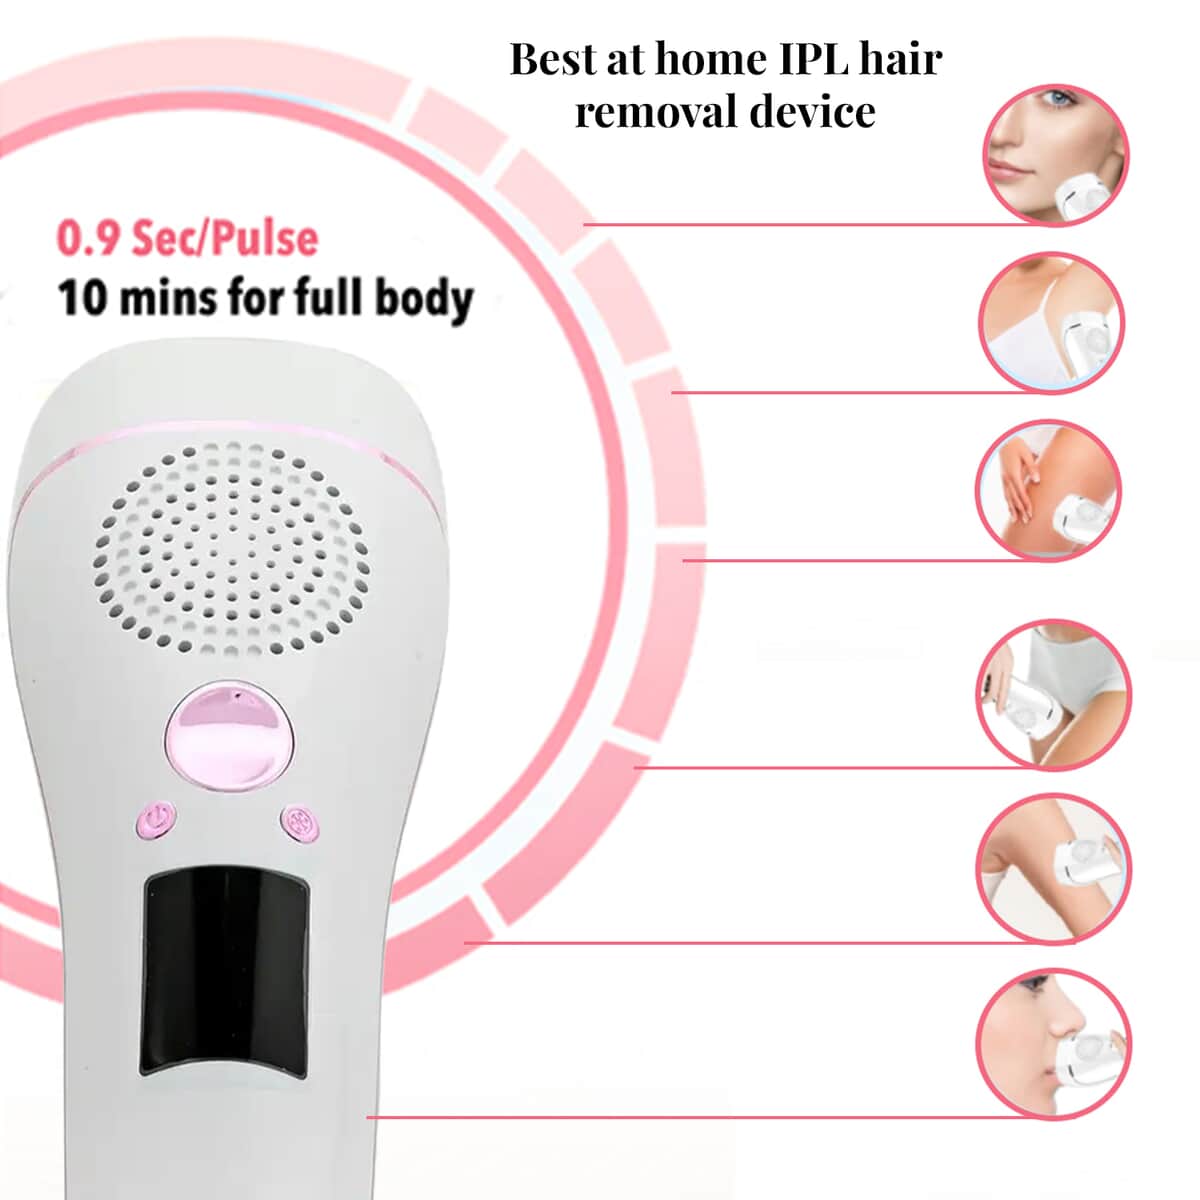 Luna'Mour ICE Cool IPL Hair Removal Device & Photofacial image number 3